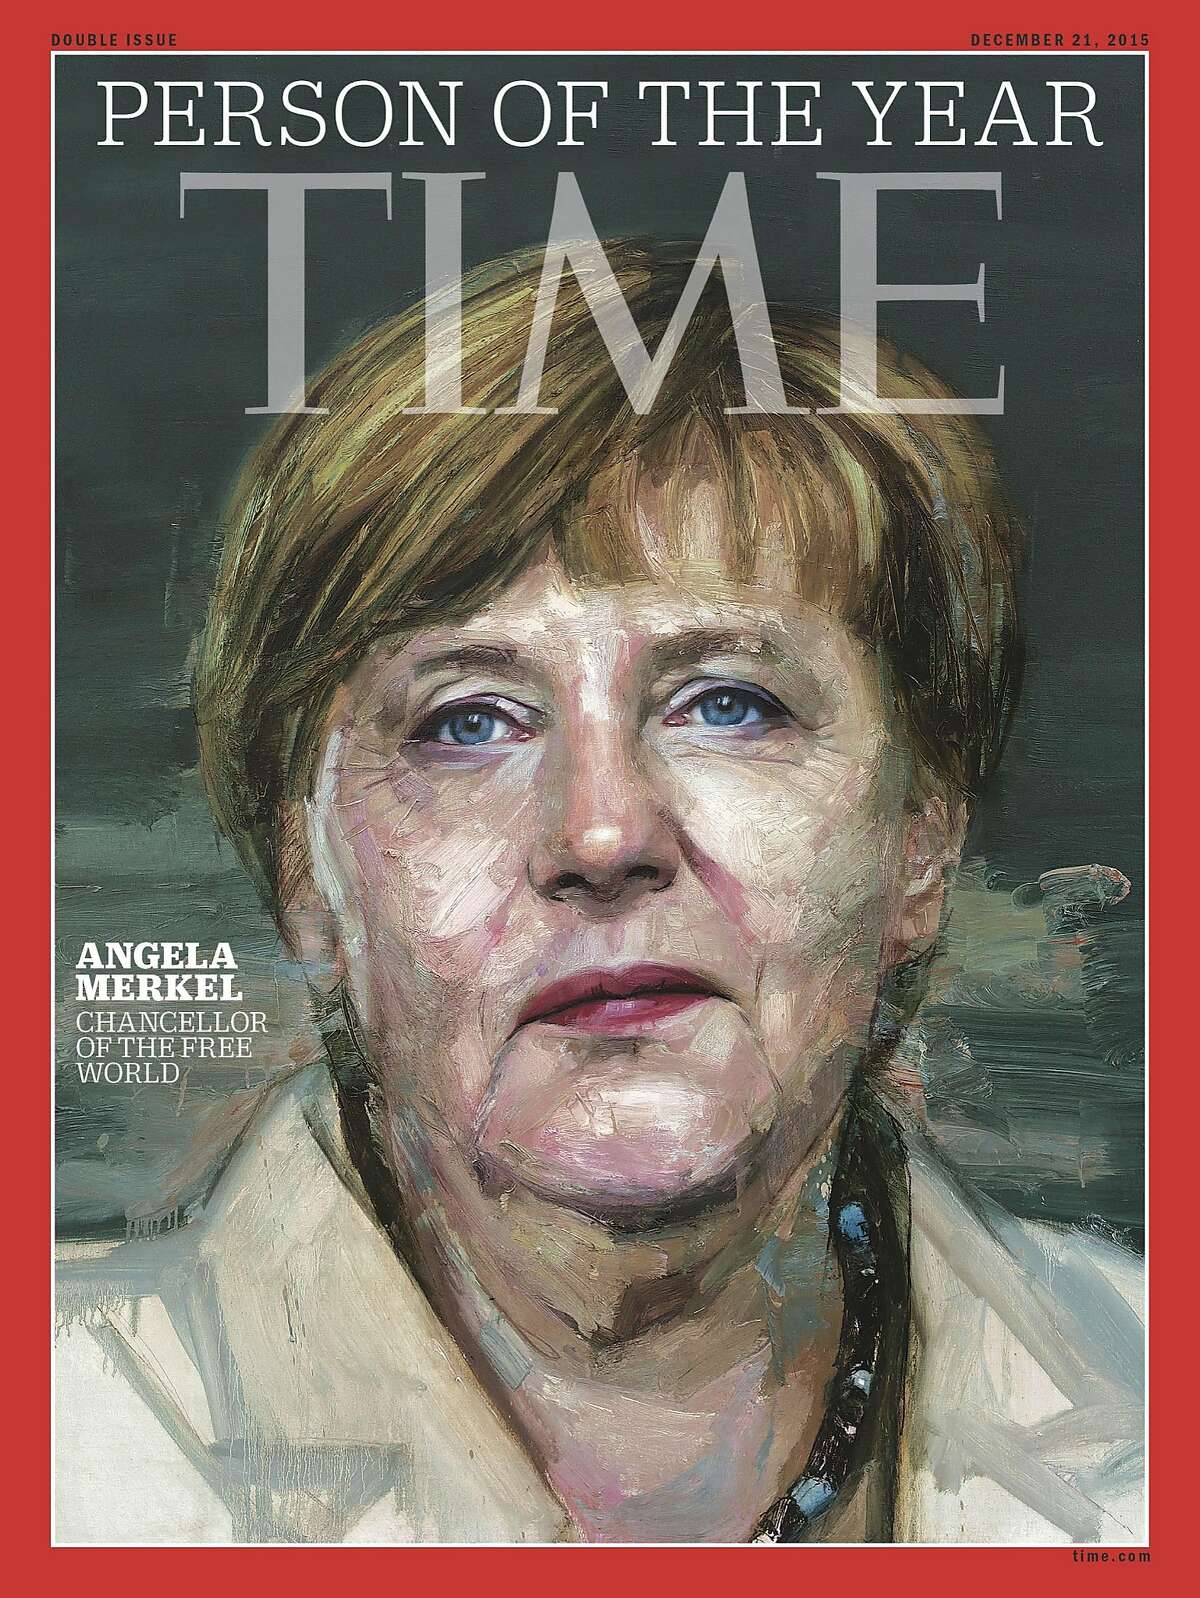 In this image provided by Time Magazine, Wednesday, Dec. 9, 2015, German Chancellor Angela Merkel is featured as Time's Person of the Year. The magazine praises her leadership on everything from Syrian refugees to the Greek debt crisis. (Time Magazine via AP)